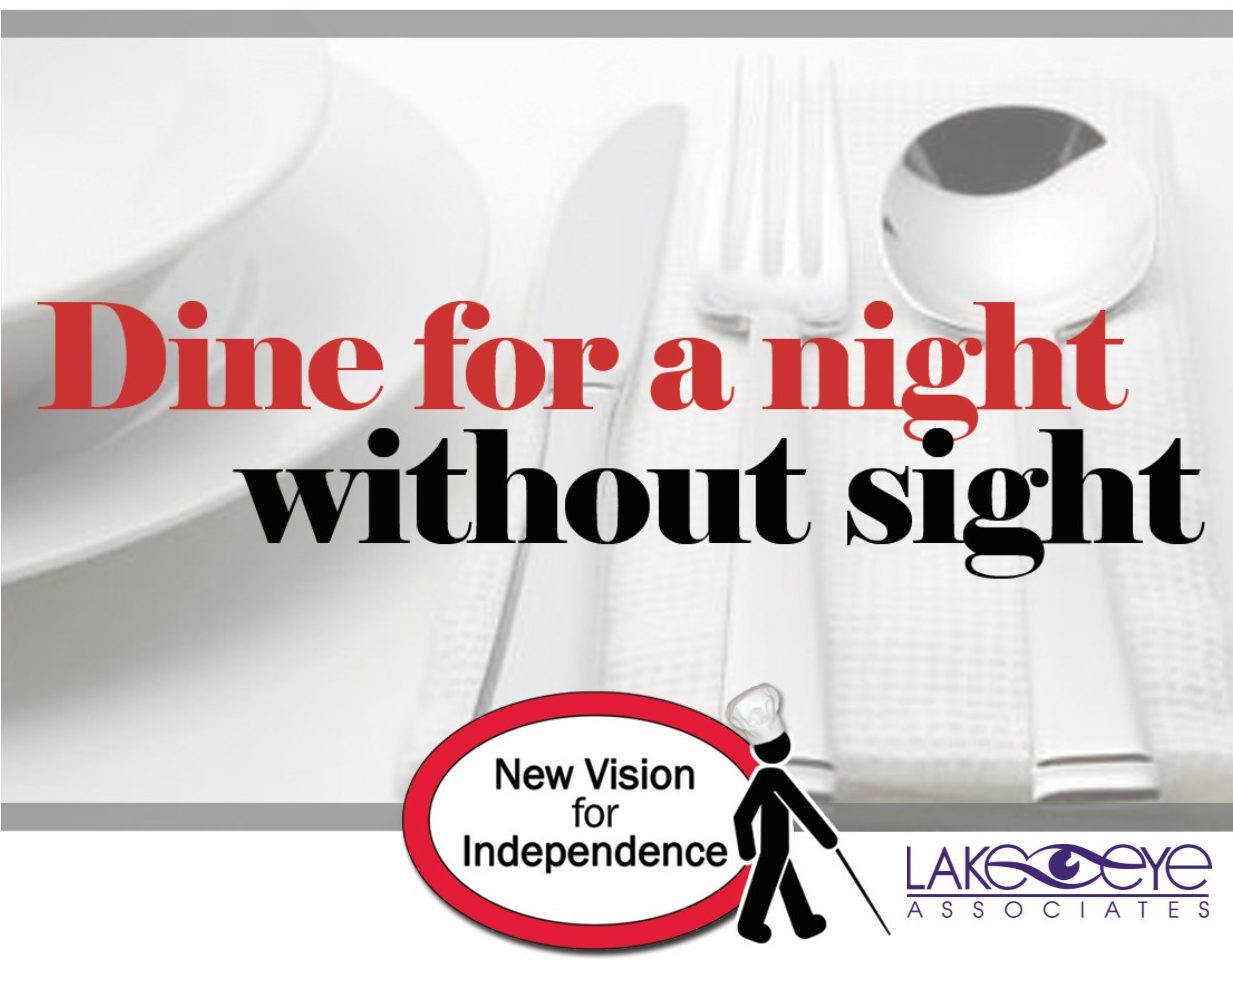 Dine for a night without sight